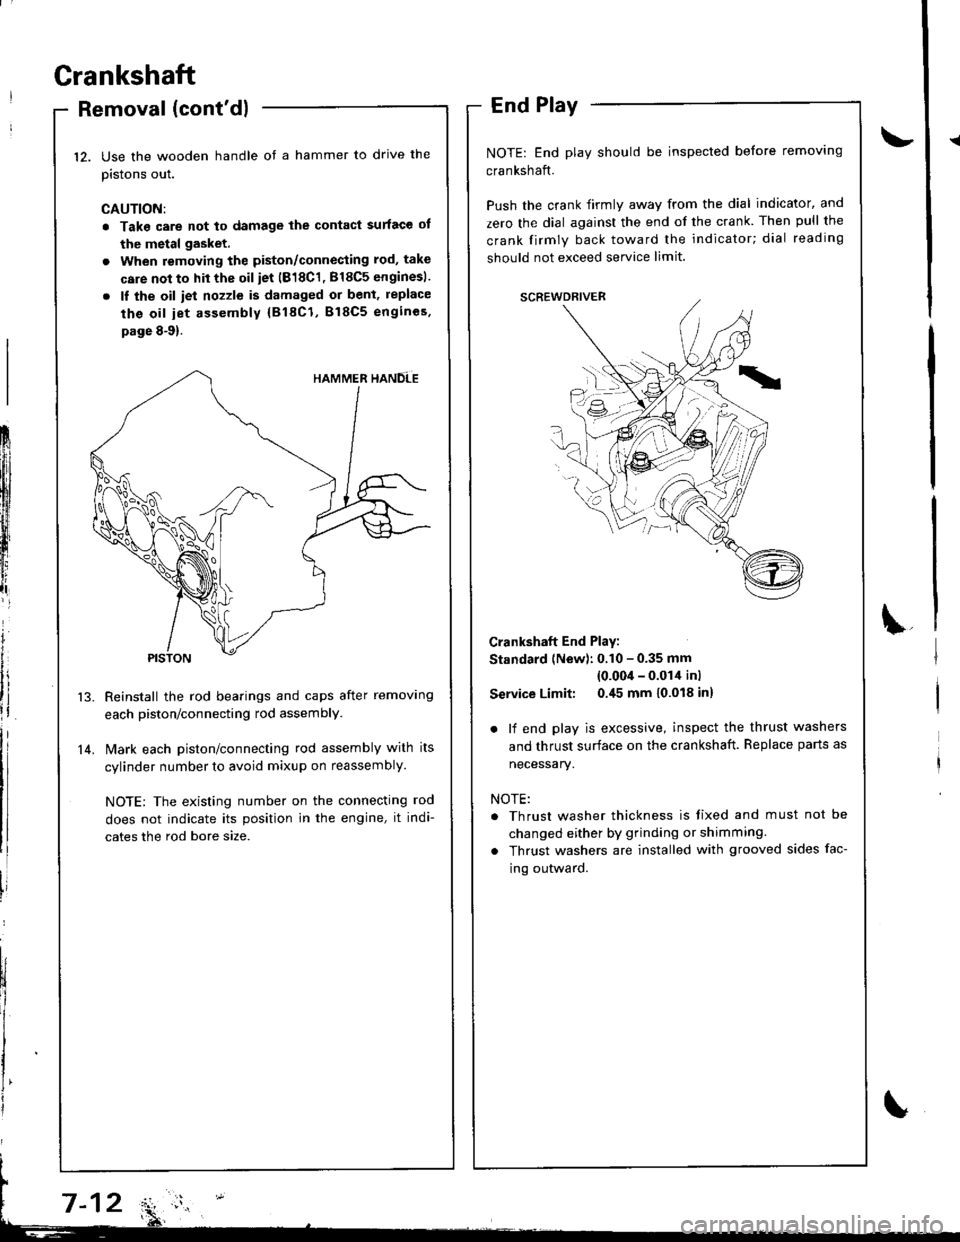 HONDA INTEGRA 1998 4.G User Guide Grankshaft
Removal (contdl
Use the wooden handle ot a hammer to drive the
pistons out.
CAUTION:
. Take care not to damage the contact surface ot
the metal gasket.
. When removing the piston/connectin